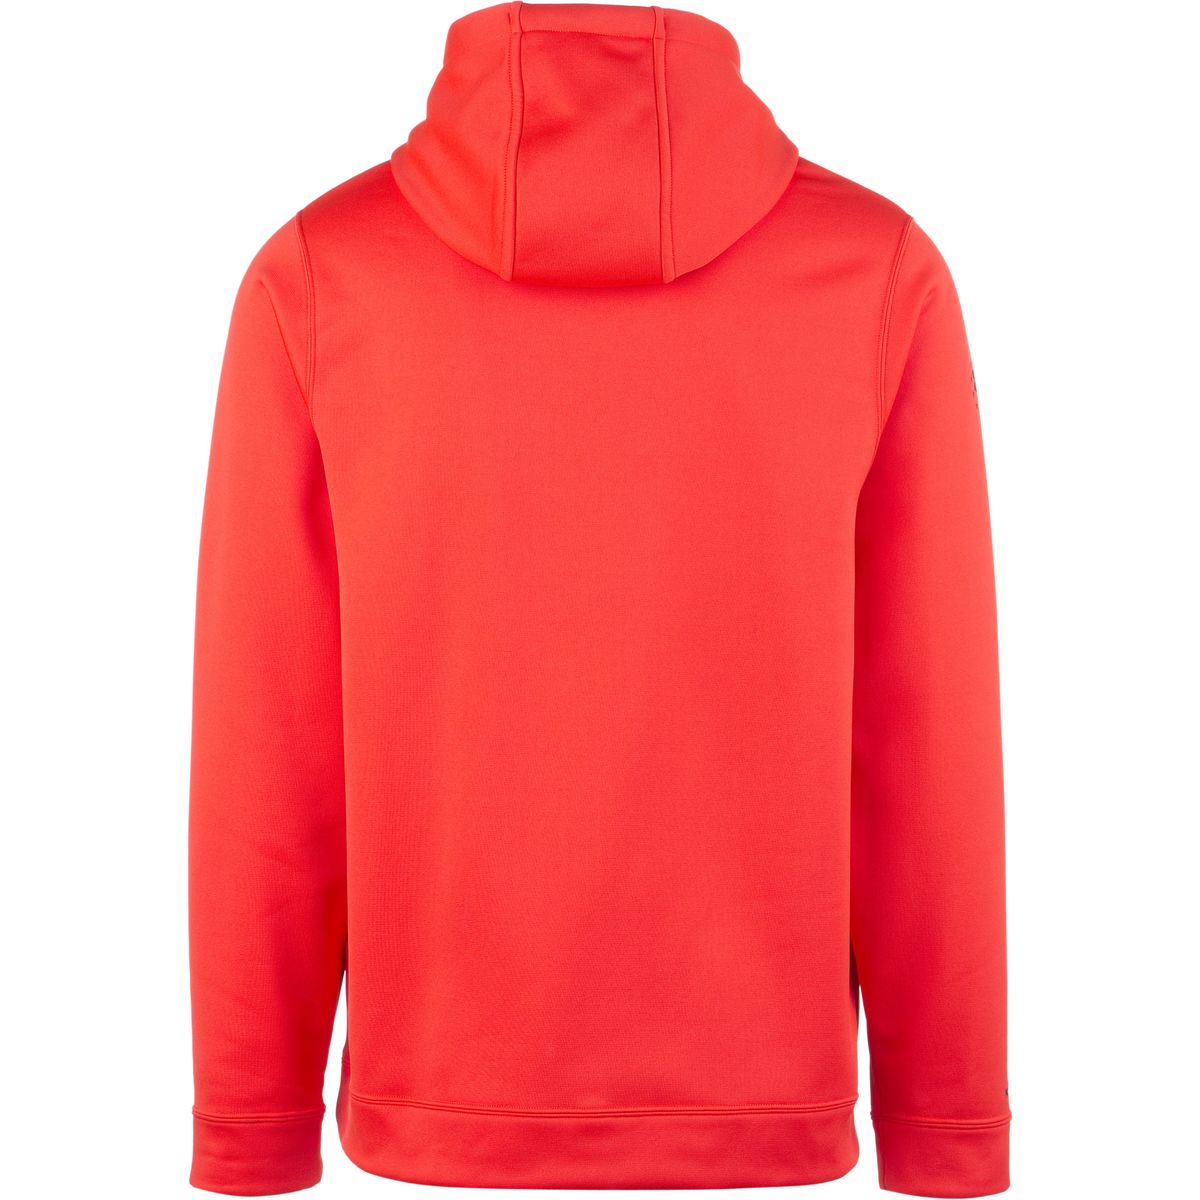 Under Armour WWP Property Of Pullover Hoodie - Men's - Clothing